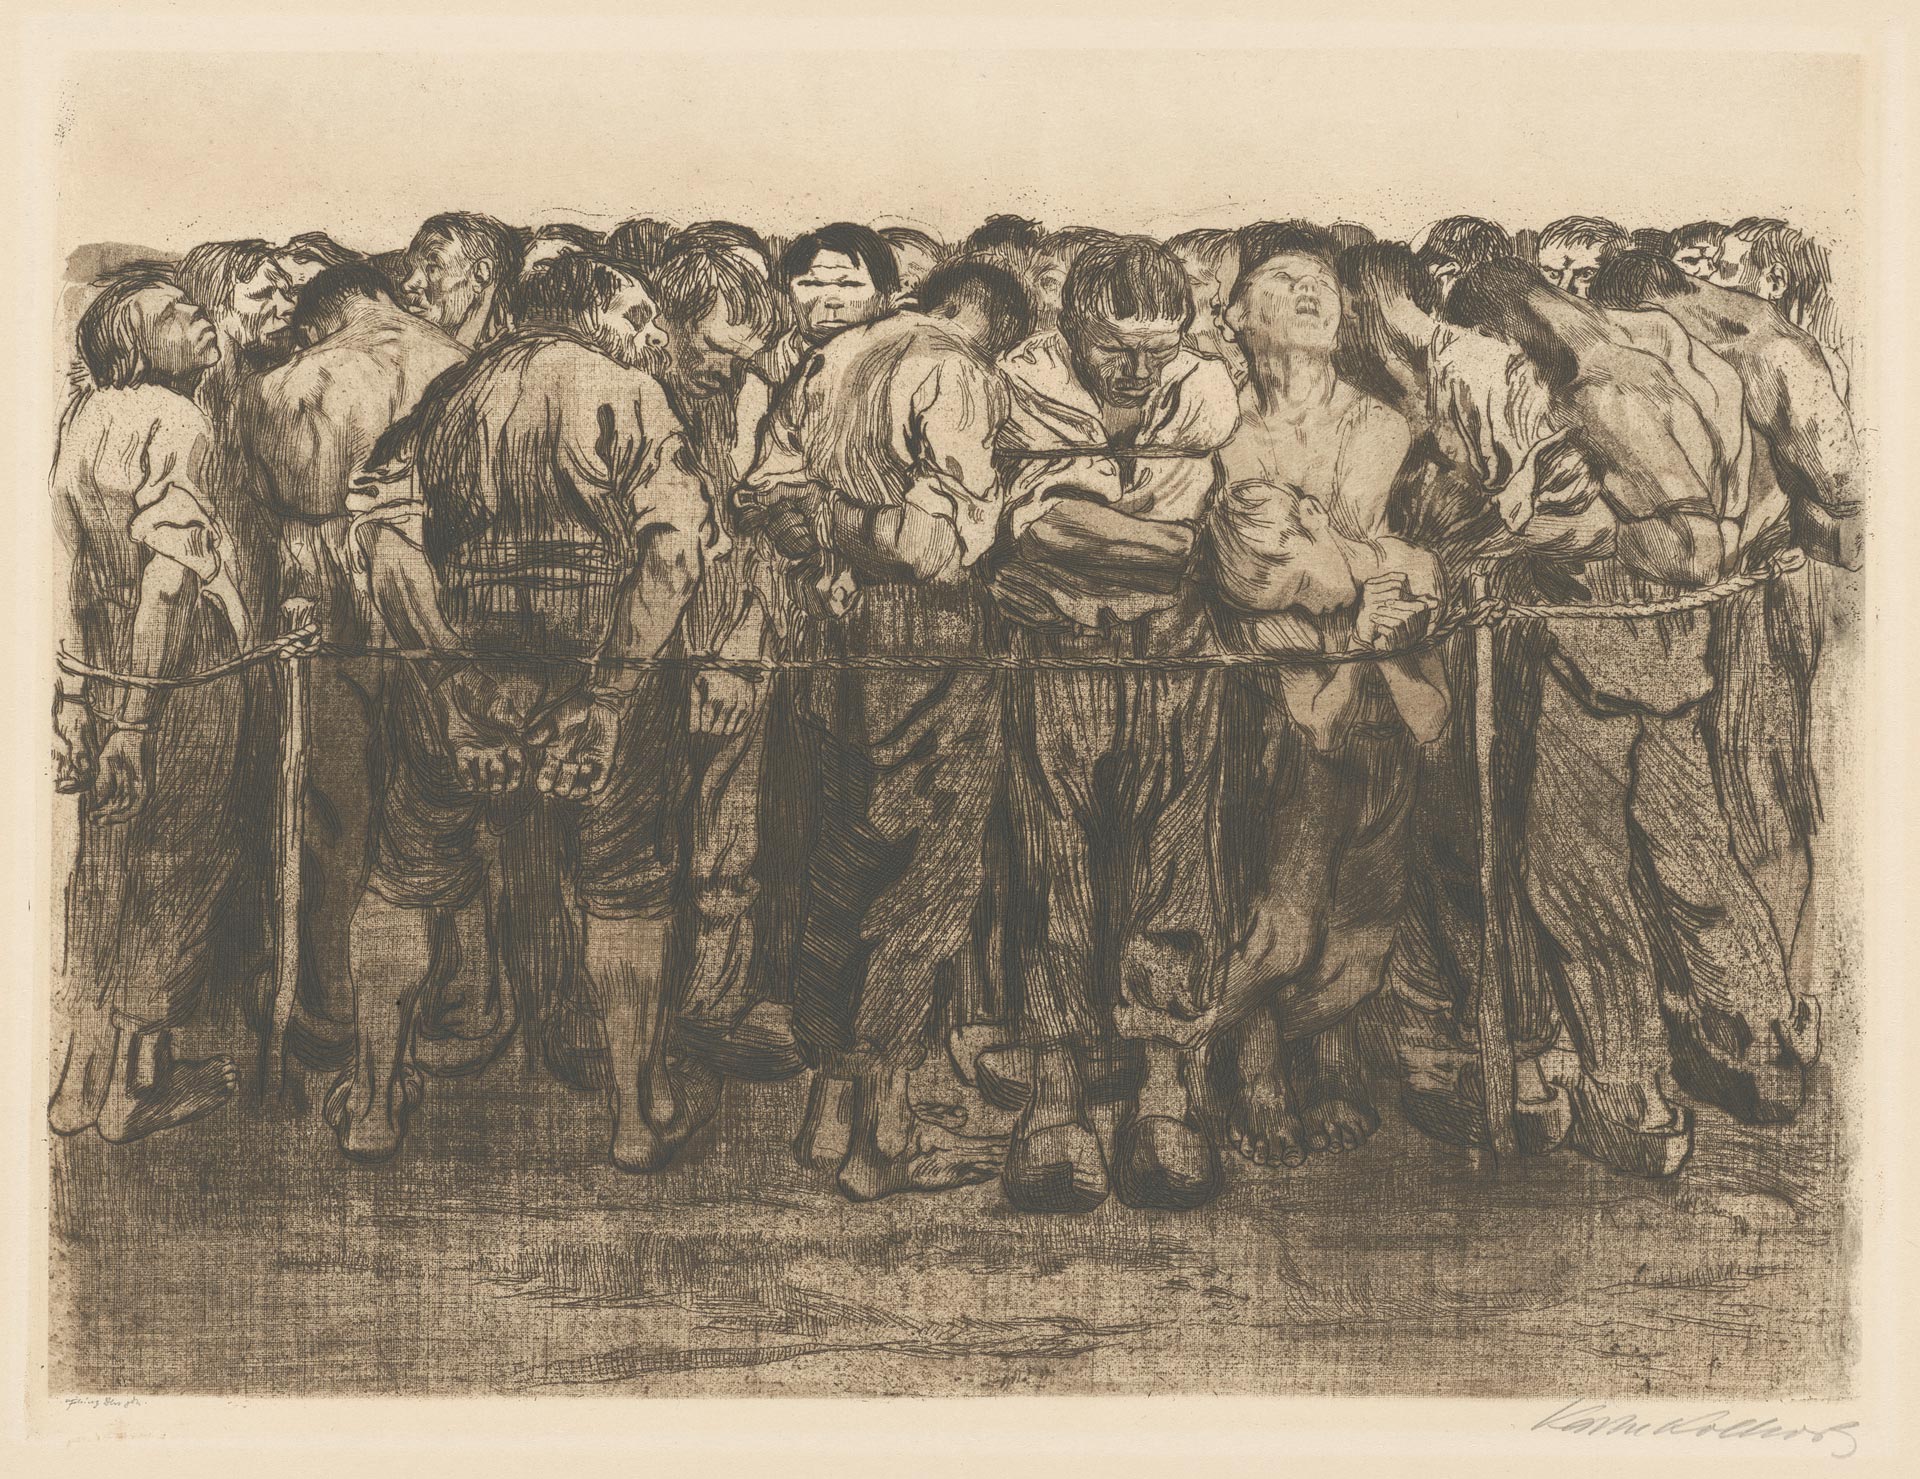 Käthe Kollwitz, The Prisoners, sheet 7 of the cycle »Peasants War«, 1908, line etching, drypoint, sandpaper and soft ground with imprint of fabric and Ziegler's transfer paper, Kn 102 IX a, Cologne Kollwitz Collection © Käthe Kollwitz Museum Köln